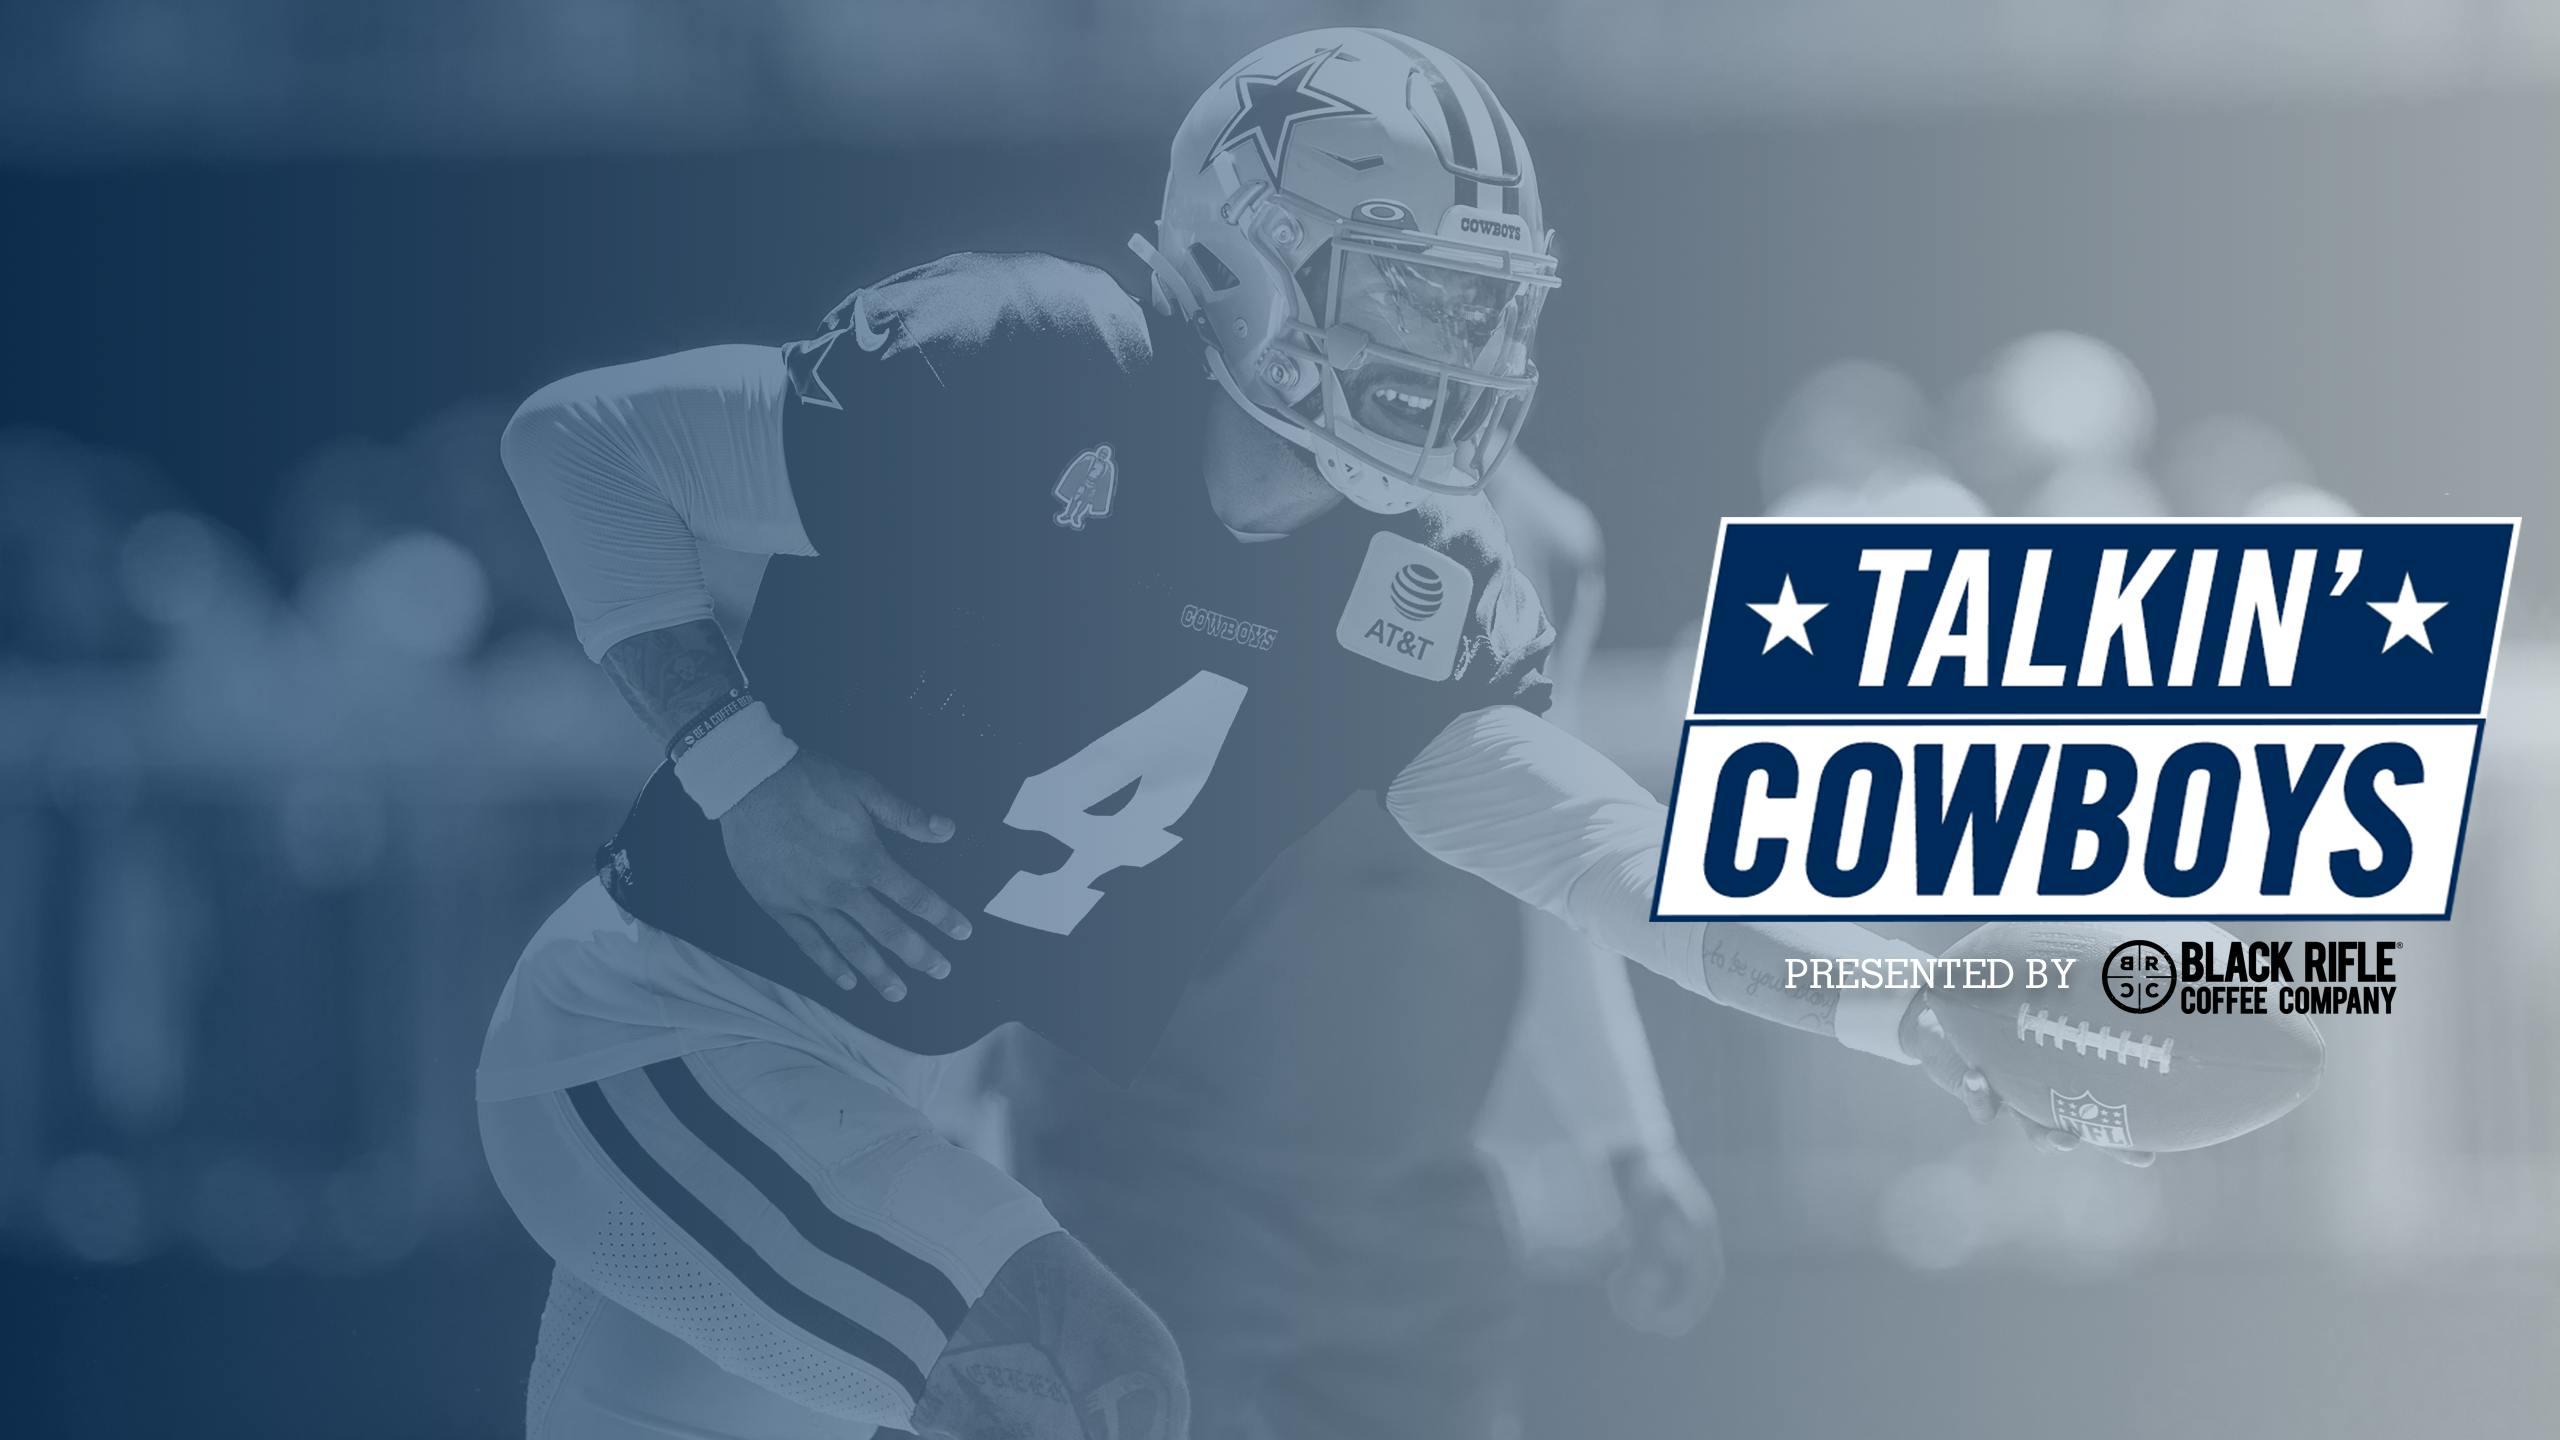 Talkin’ Cowboys: Part of the Game